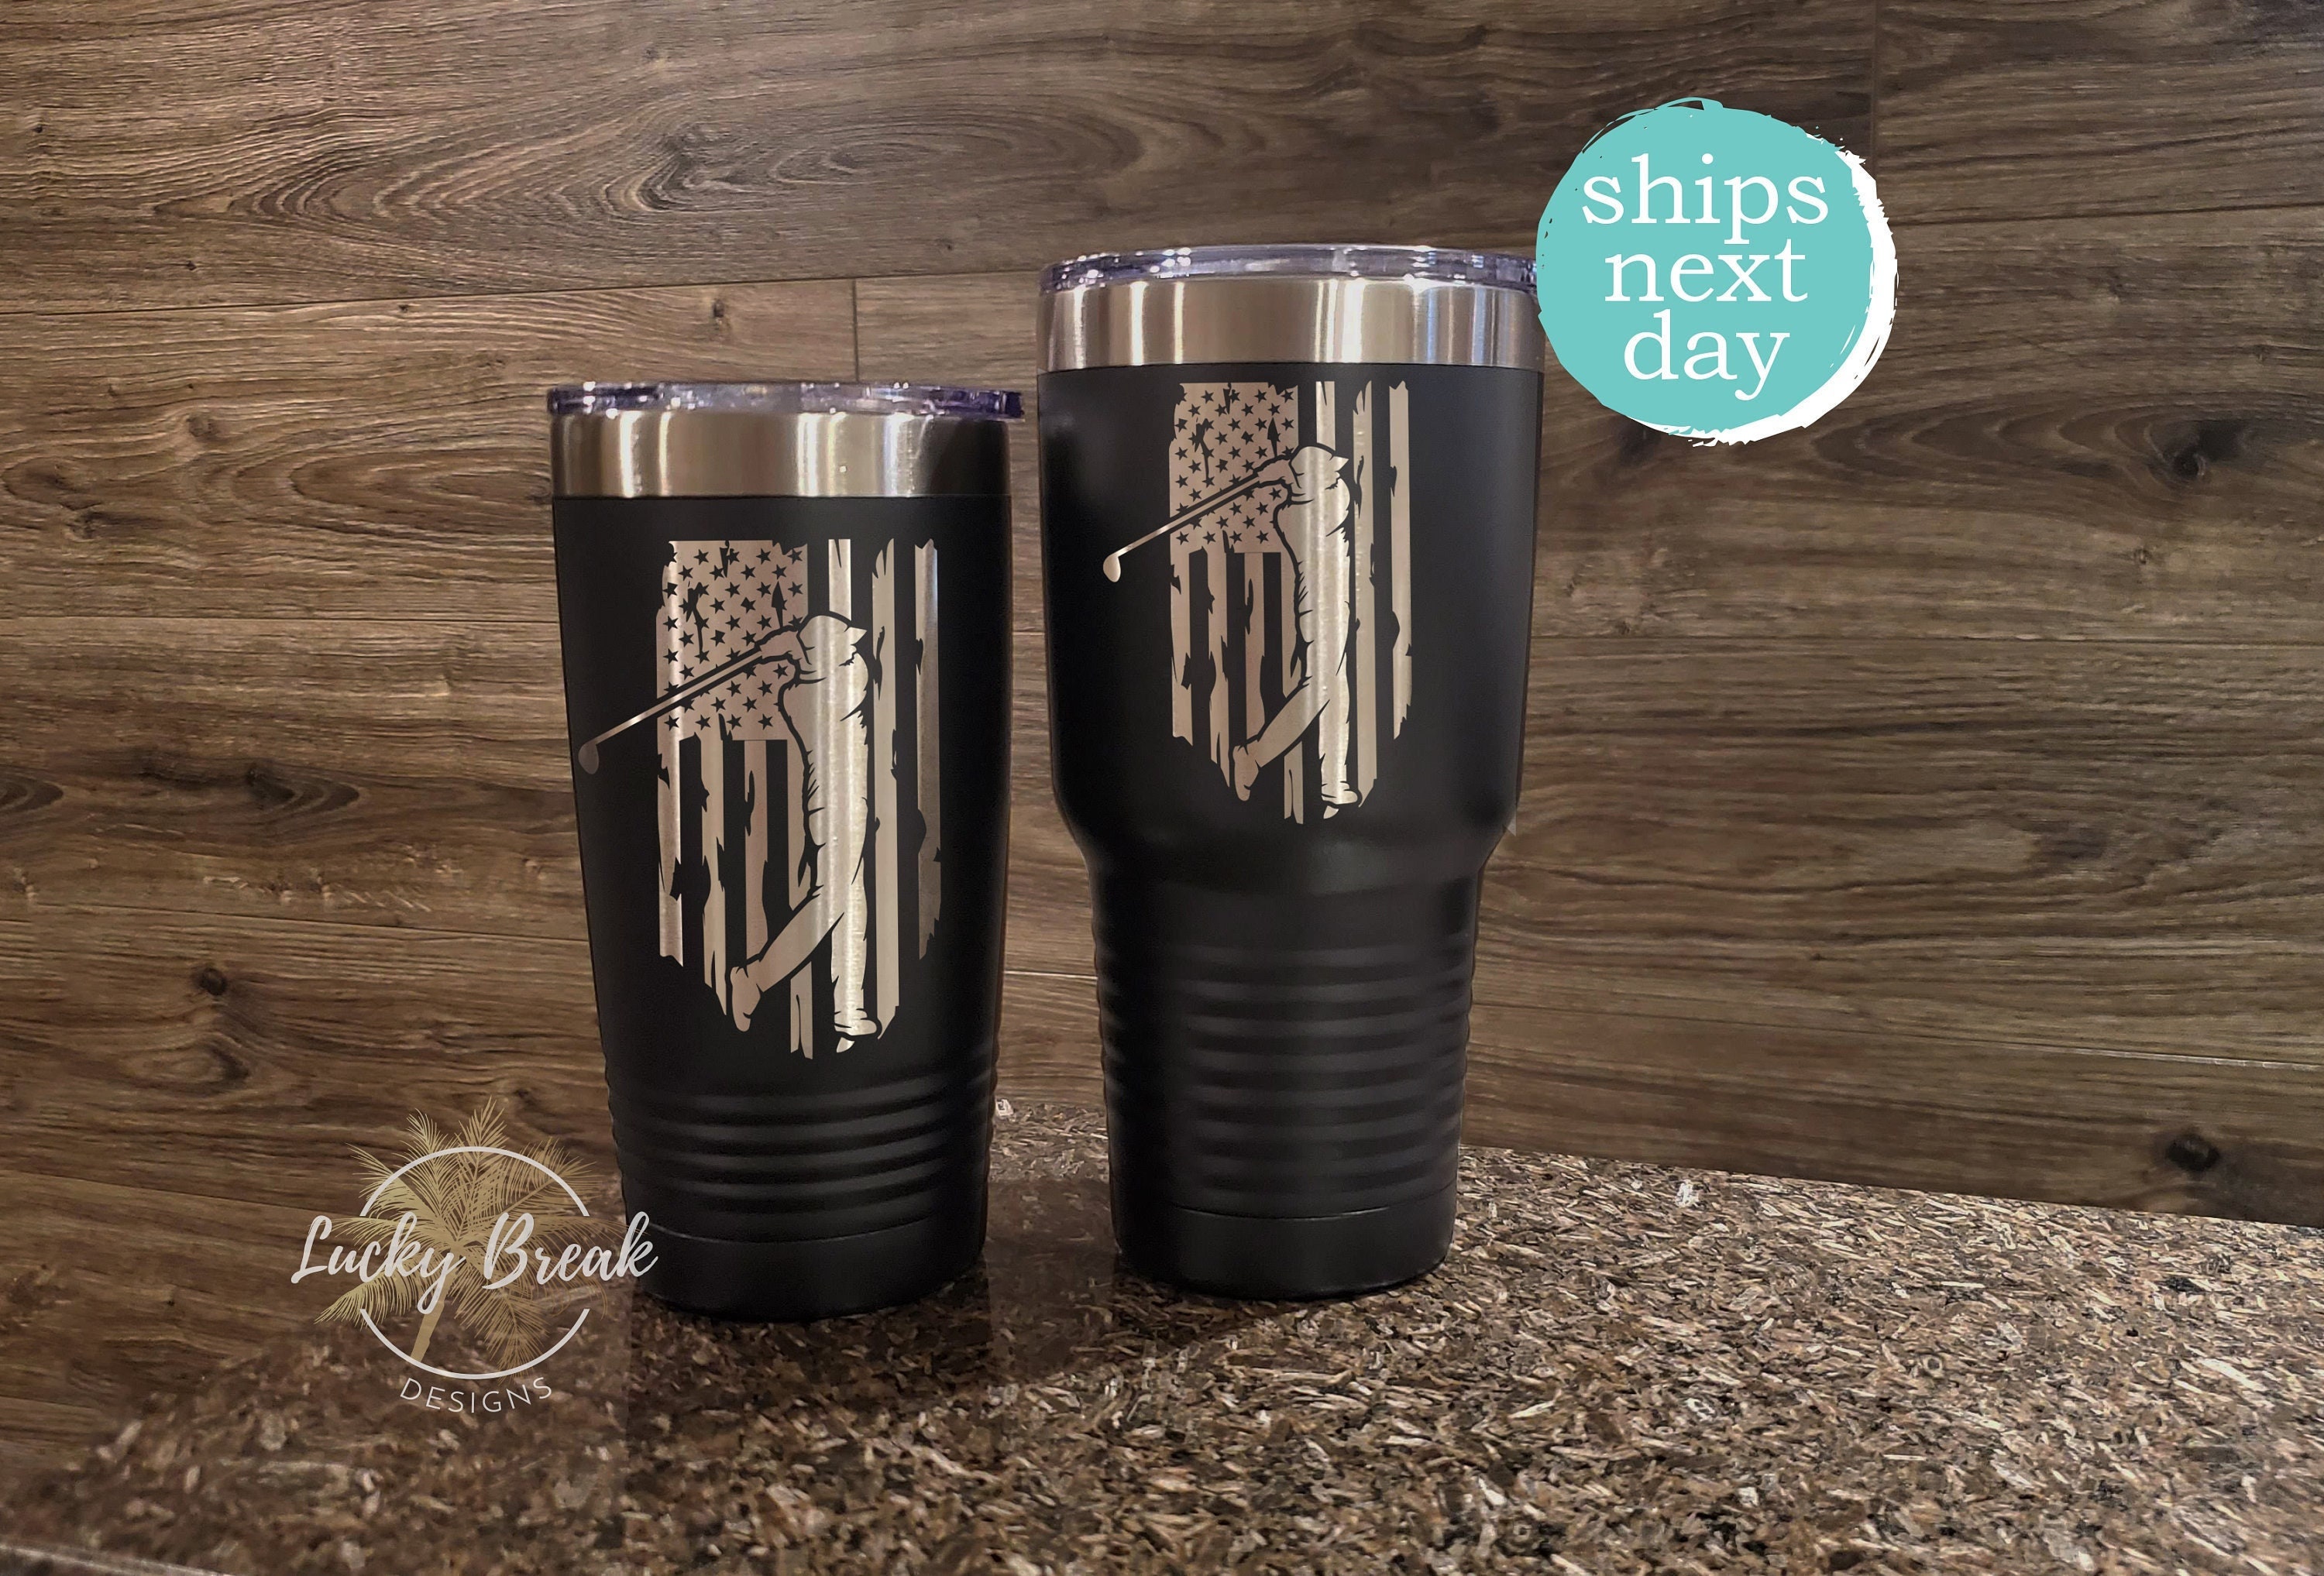 Corkcicle® Cold Cup Tumbler with Straw 24-Oz. - Laser-Engraved  Personalization Available